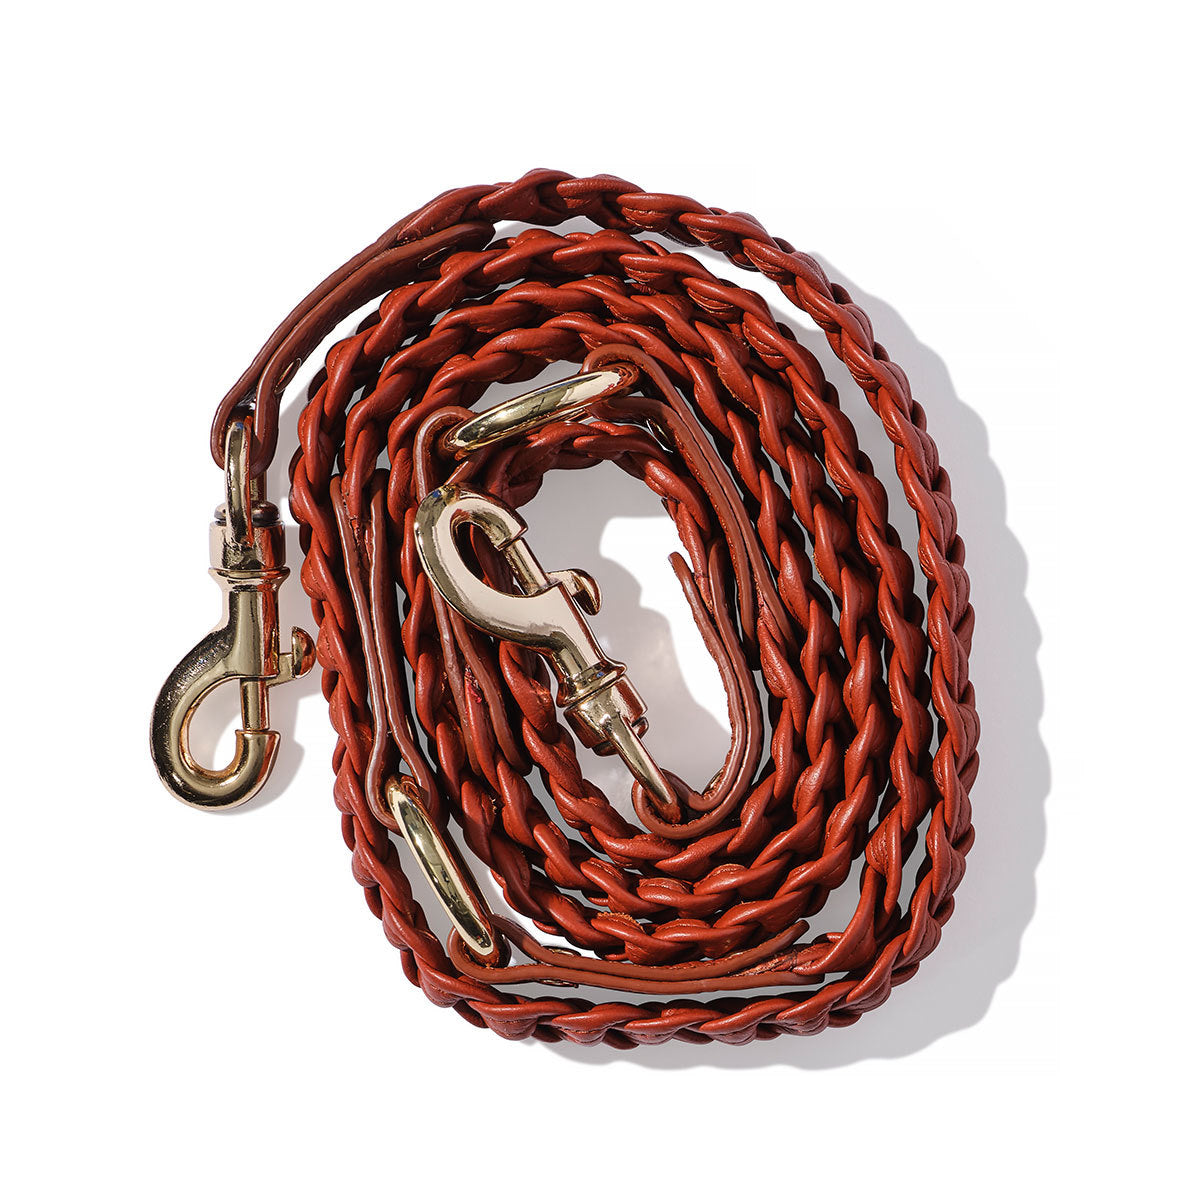 Woven Dog leads